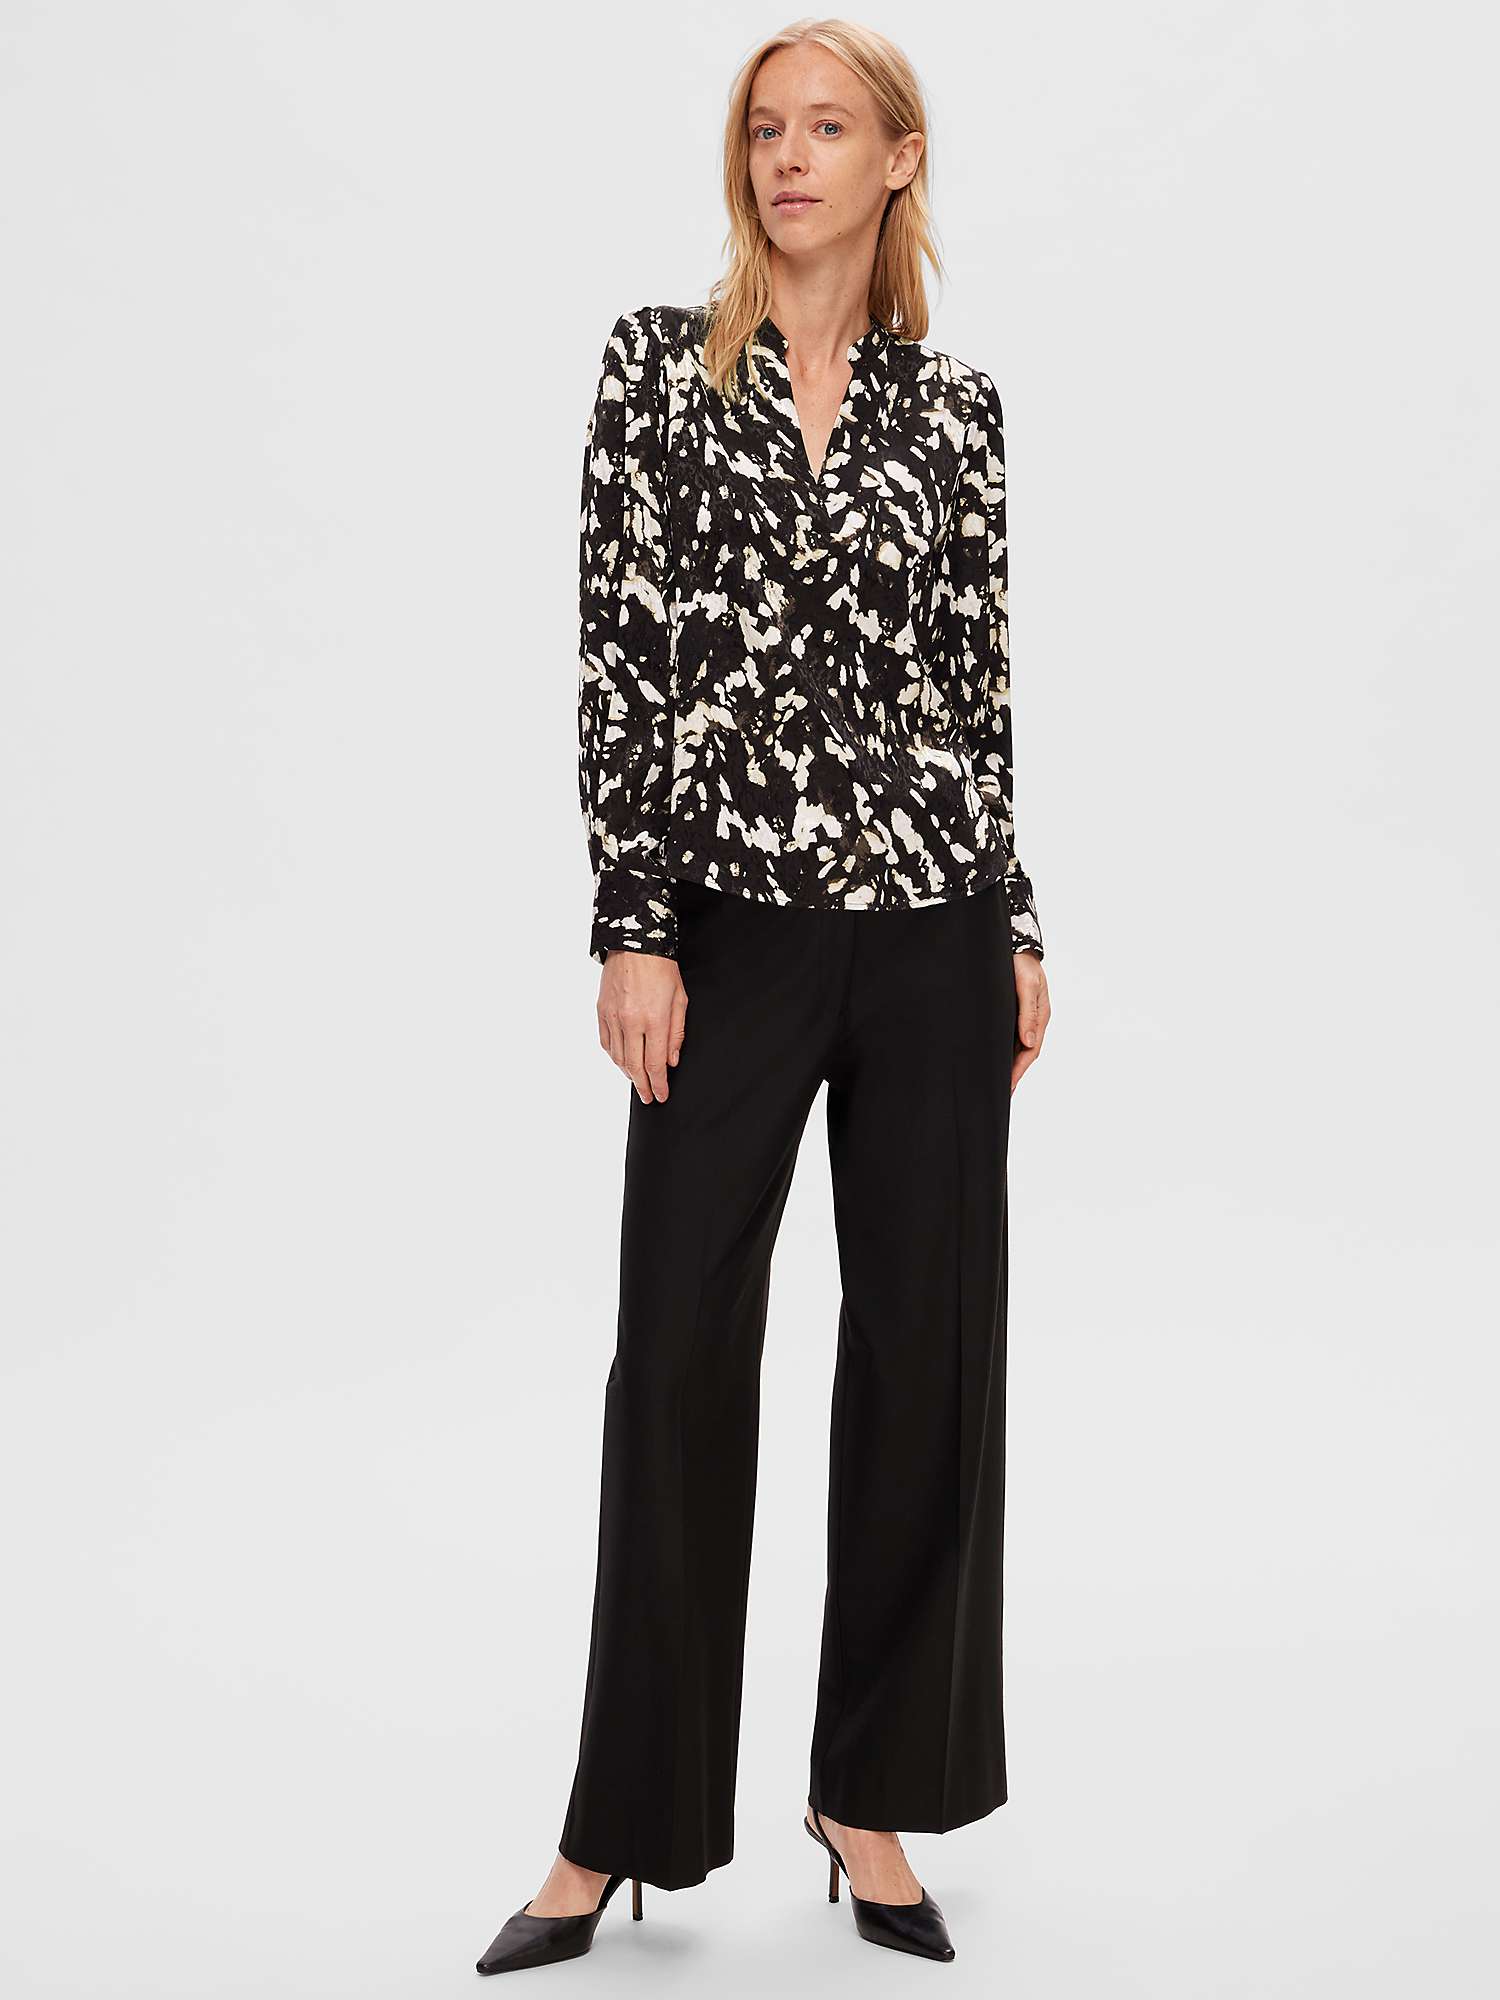 Buy SELECTED FEMME Abstract Print Blouse, Java Online at johnlewis.com